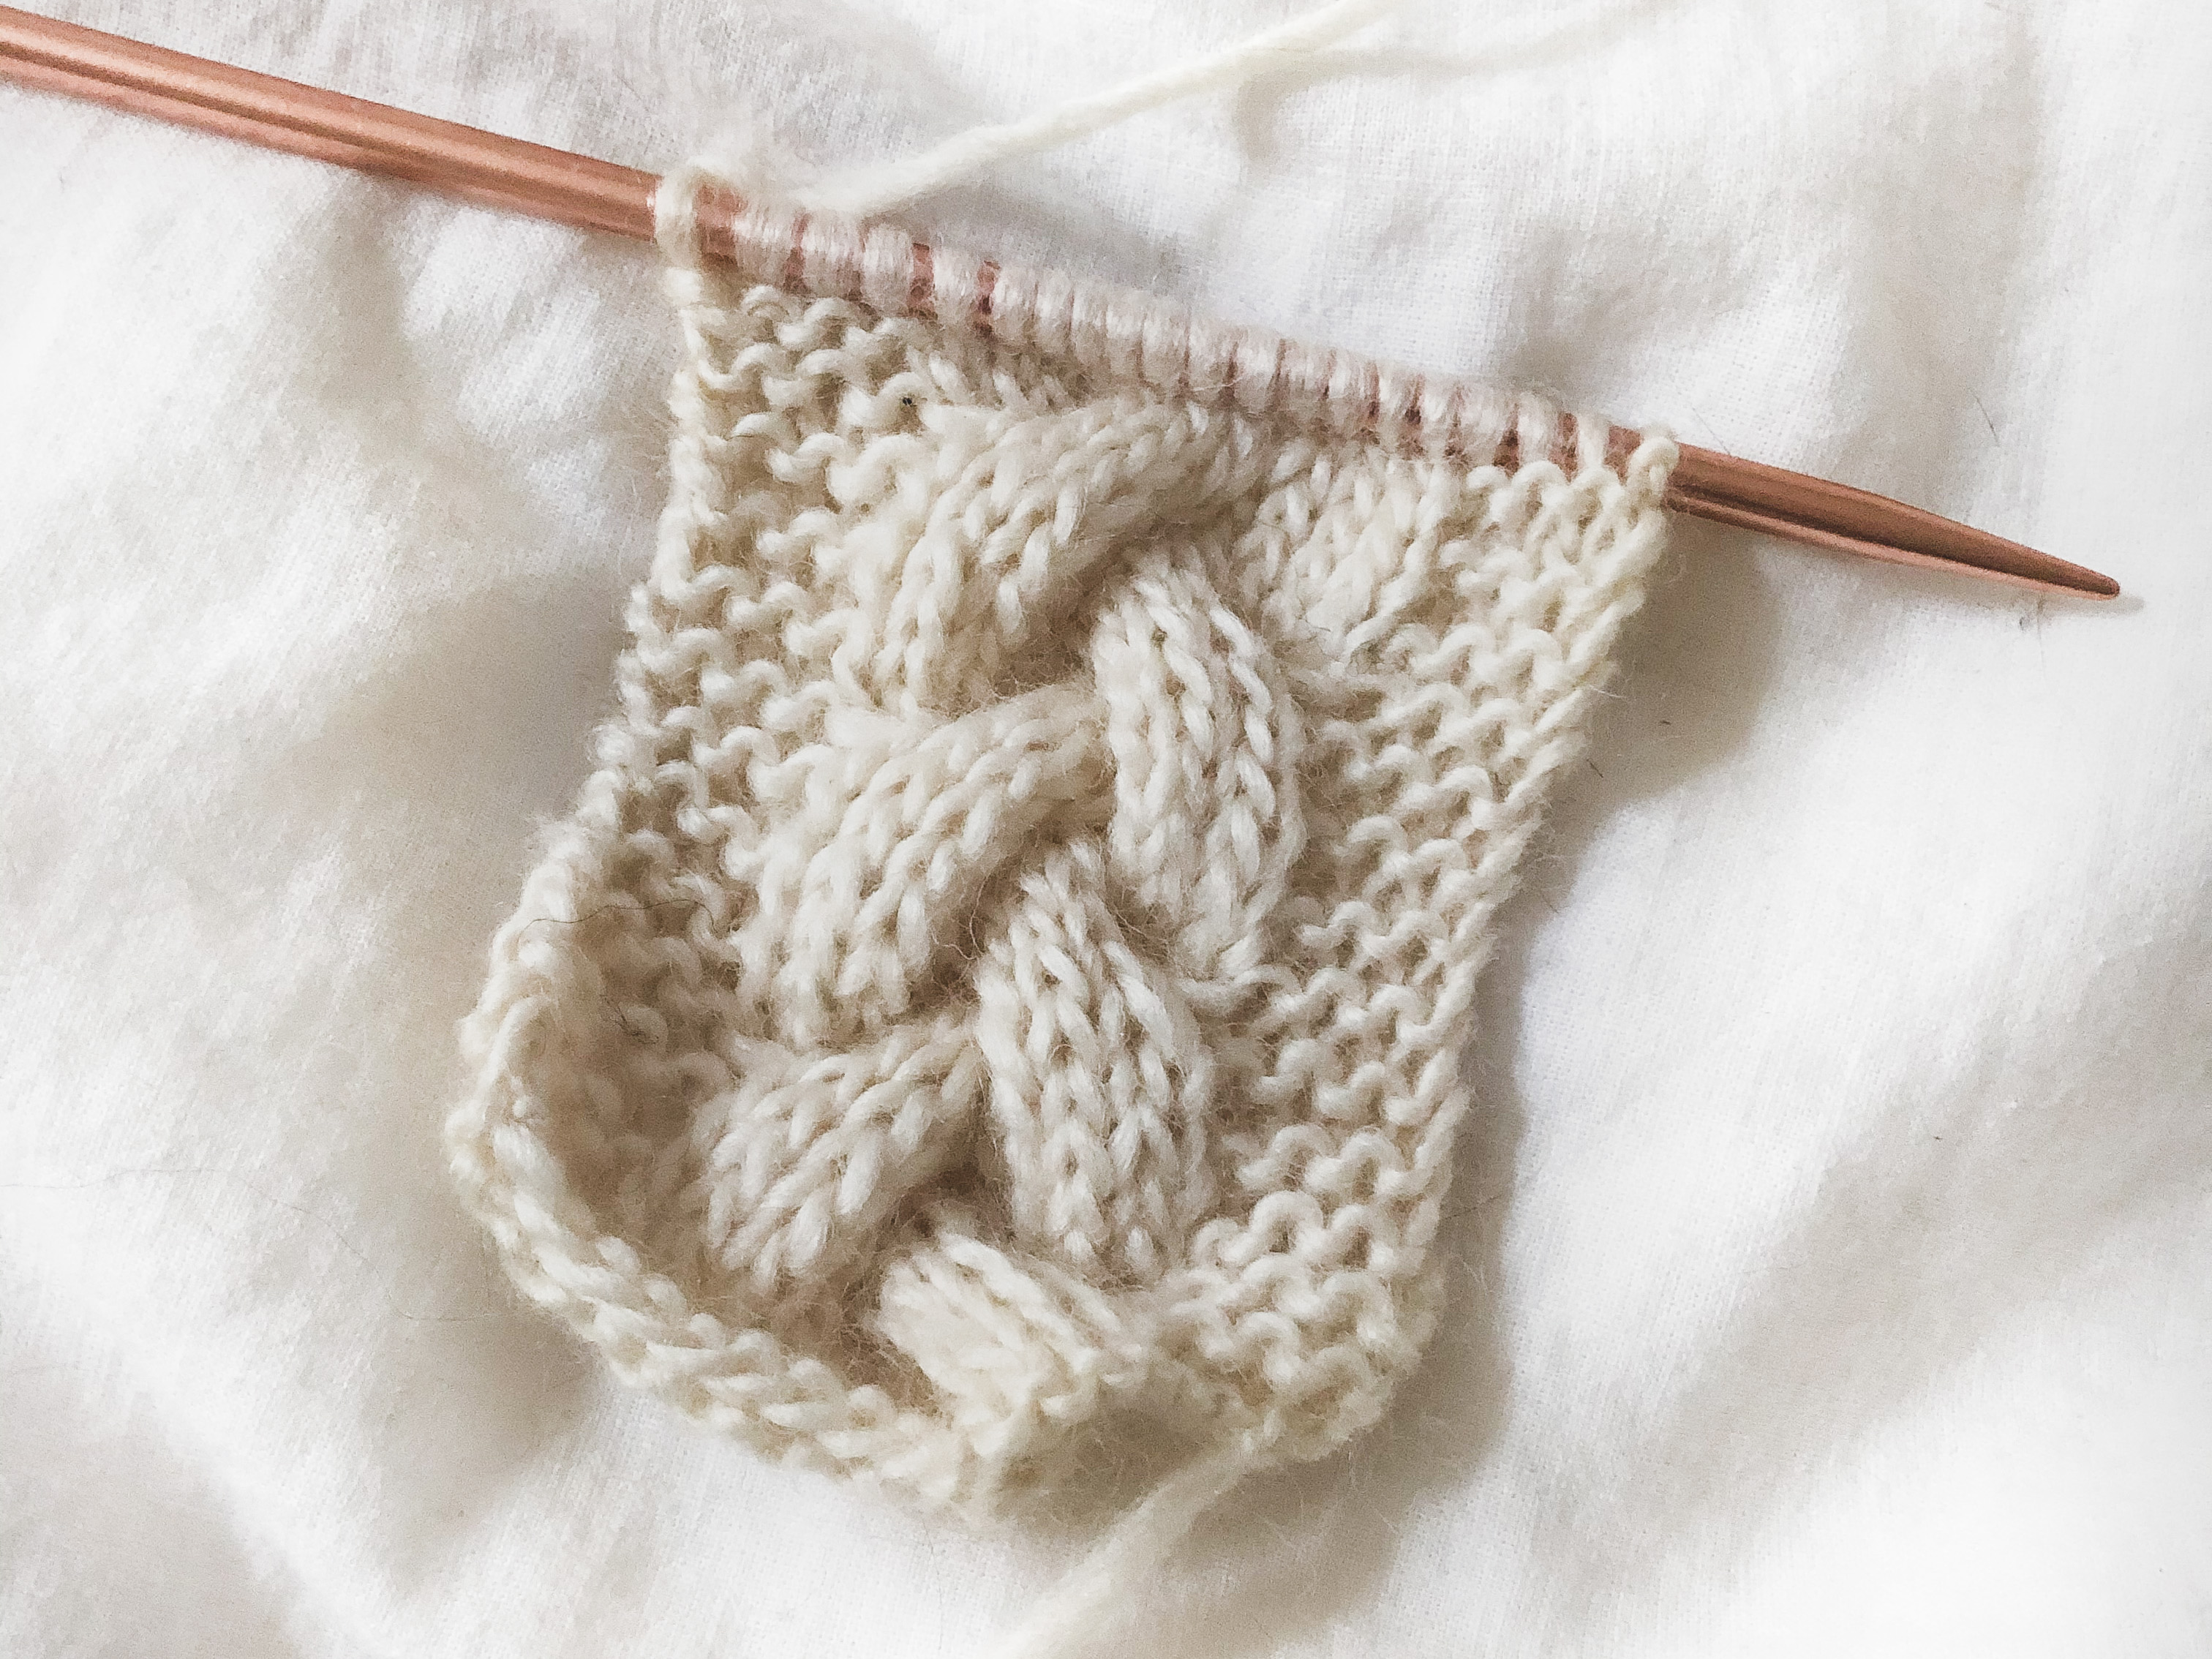 How to knit a braid cable | Knit On